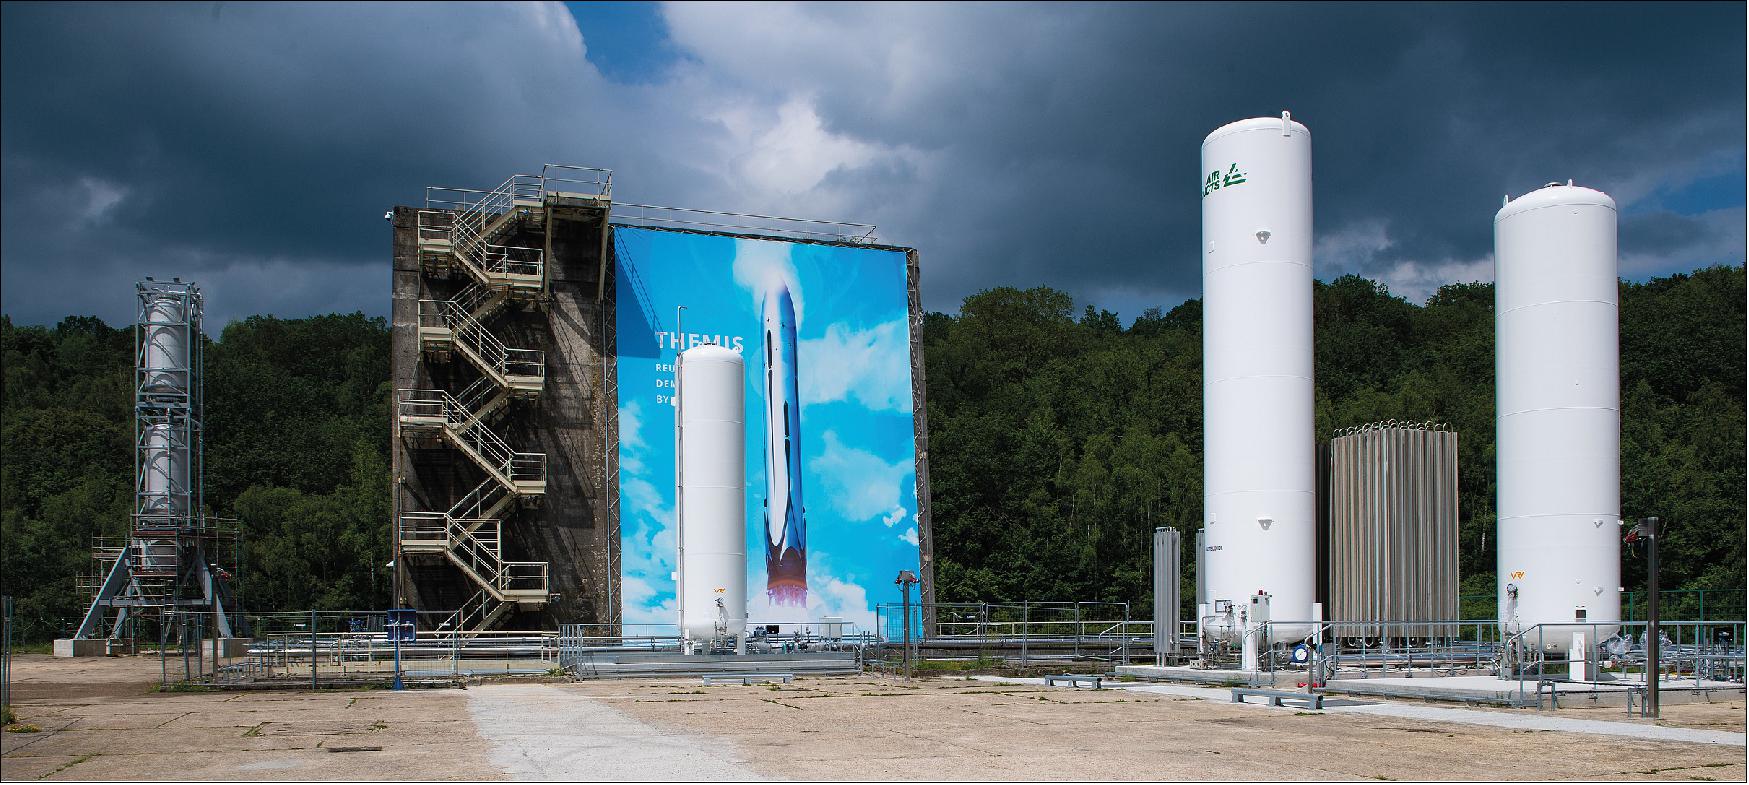 Figure 22: ESA is taking the first steps towards the in-flight demonstration of a prototype reusable rocket first stage called Themis from 2023 onwards(image credit: ArianeGroup)